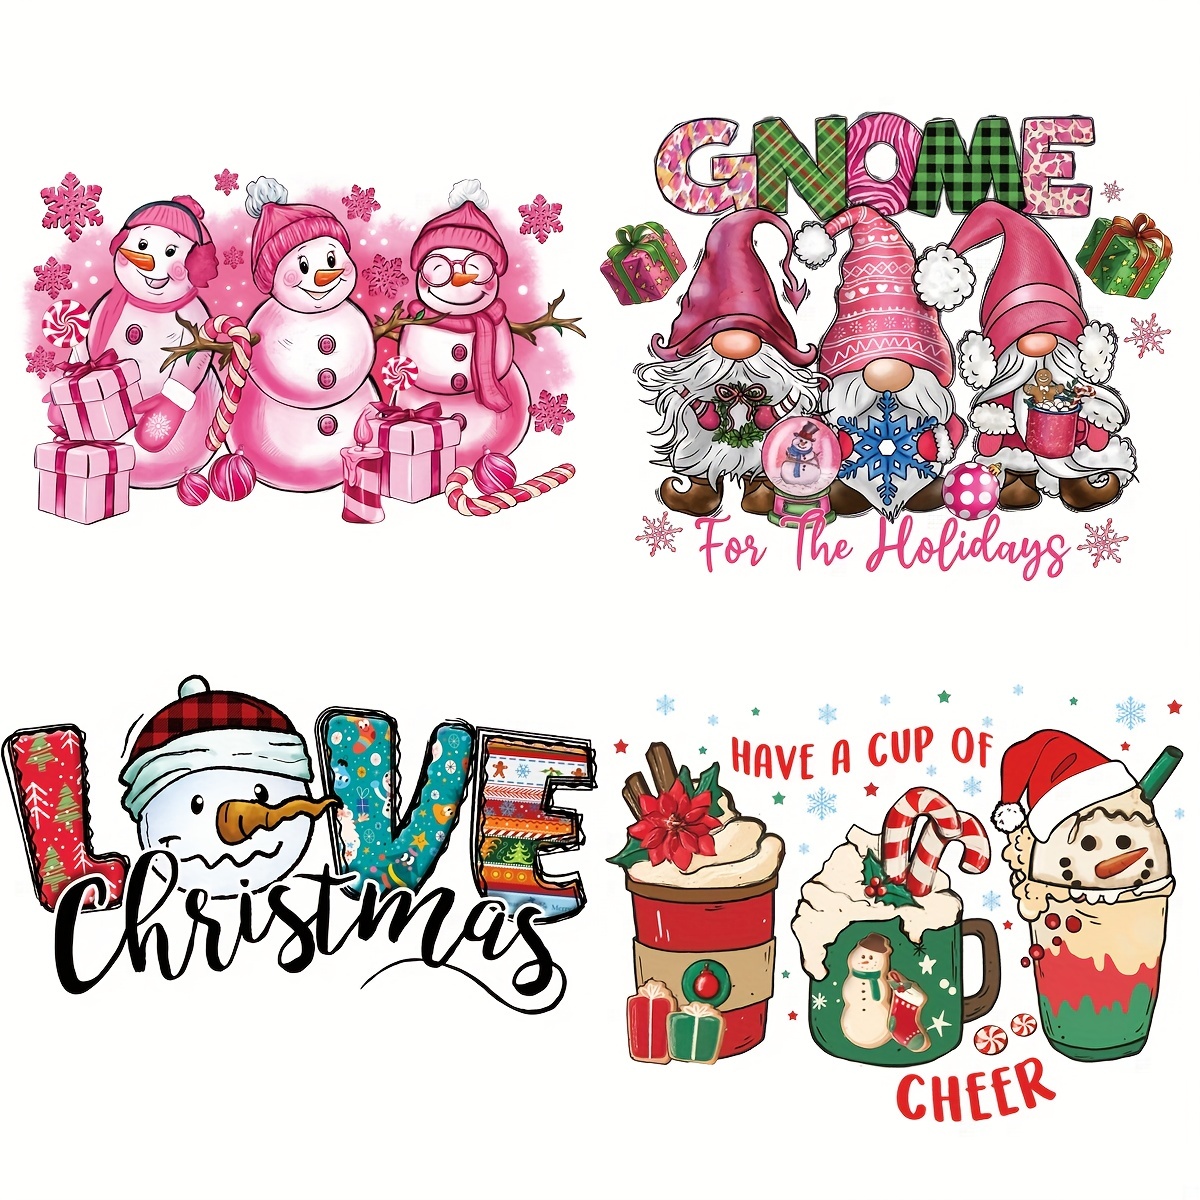  8PCS Christmas Iron on Transfers, Iron on Decals for T Shirts  Iron on Patches DTF Transfers Ready to Press Heat Transfer Designs Stickers  for Clothing Fabric DIY Craft (8PCS Christmas Decals-A)